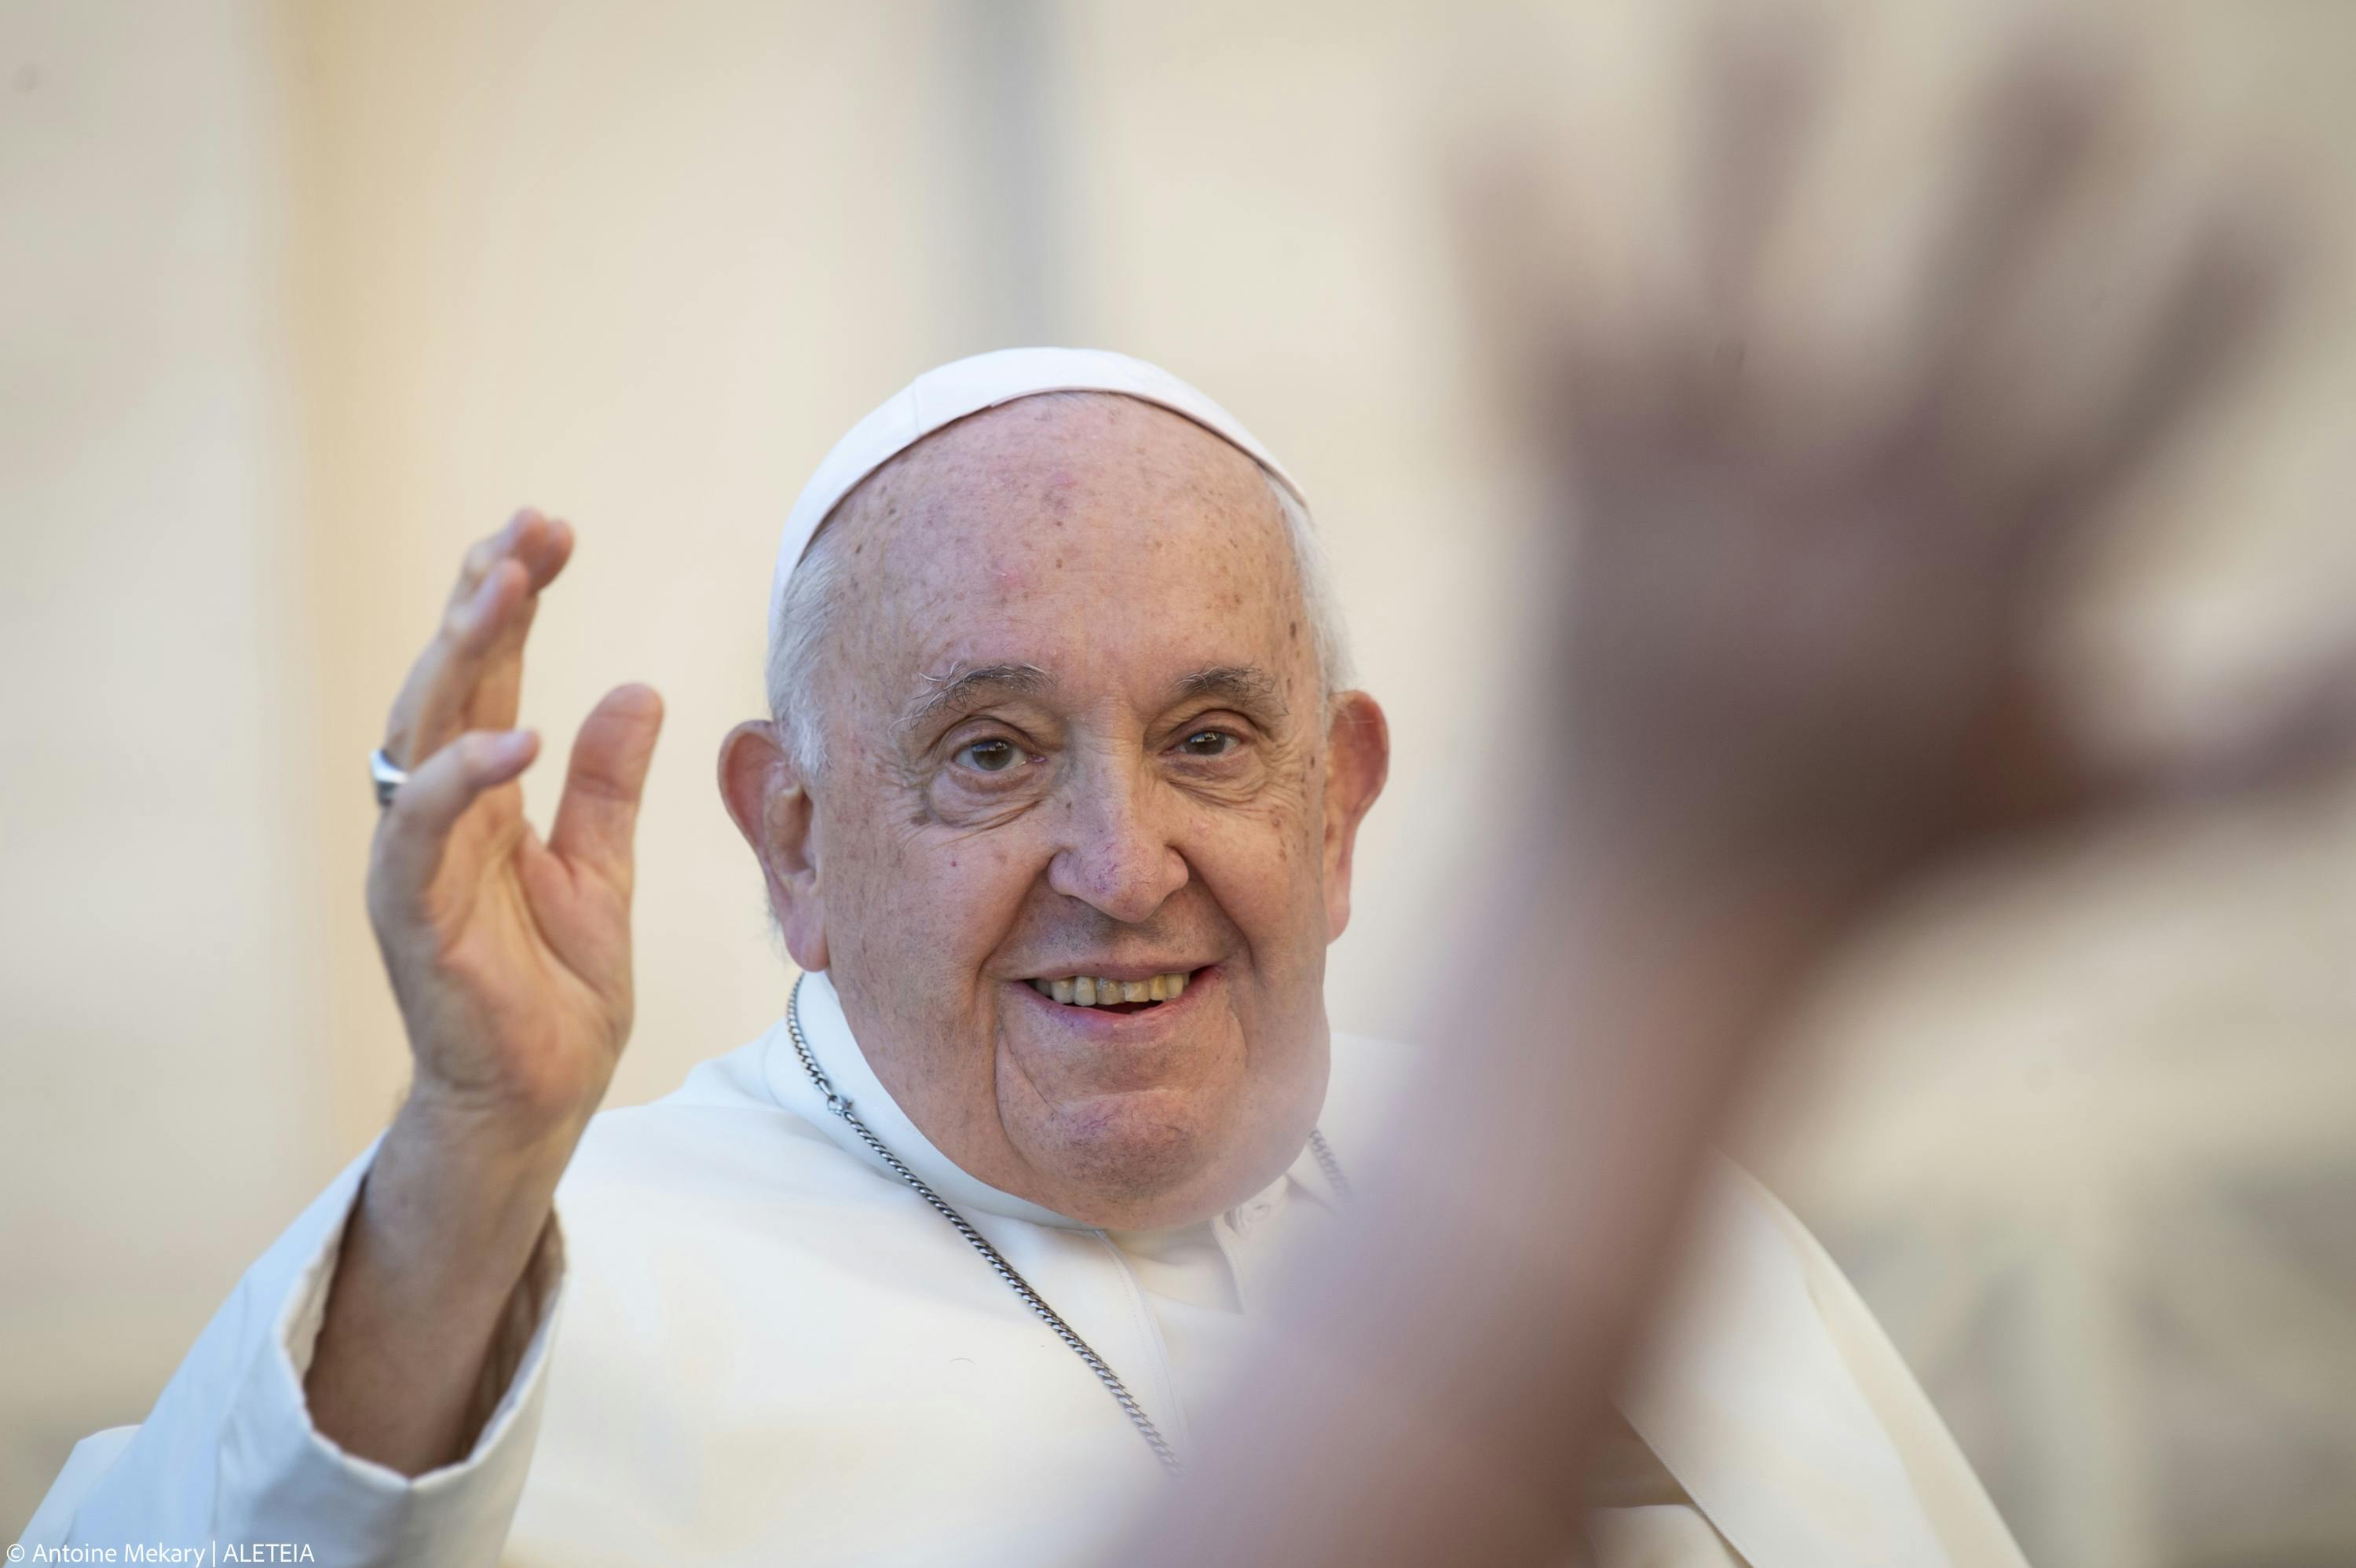 Pope sends message to youth about hope